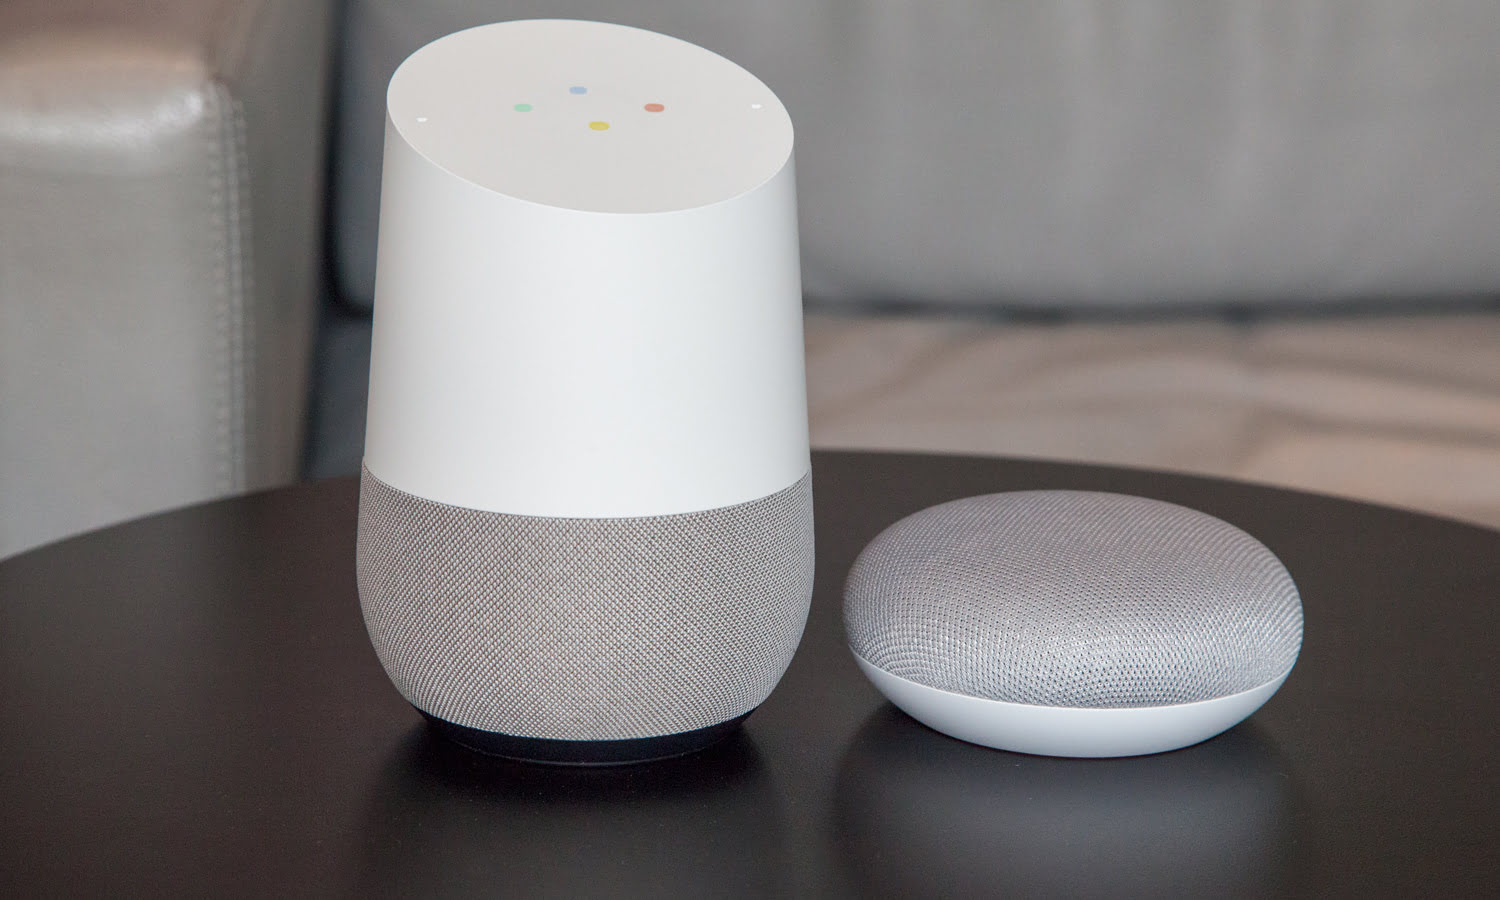 What Is The Difference Between Google Home And Google Home Mini